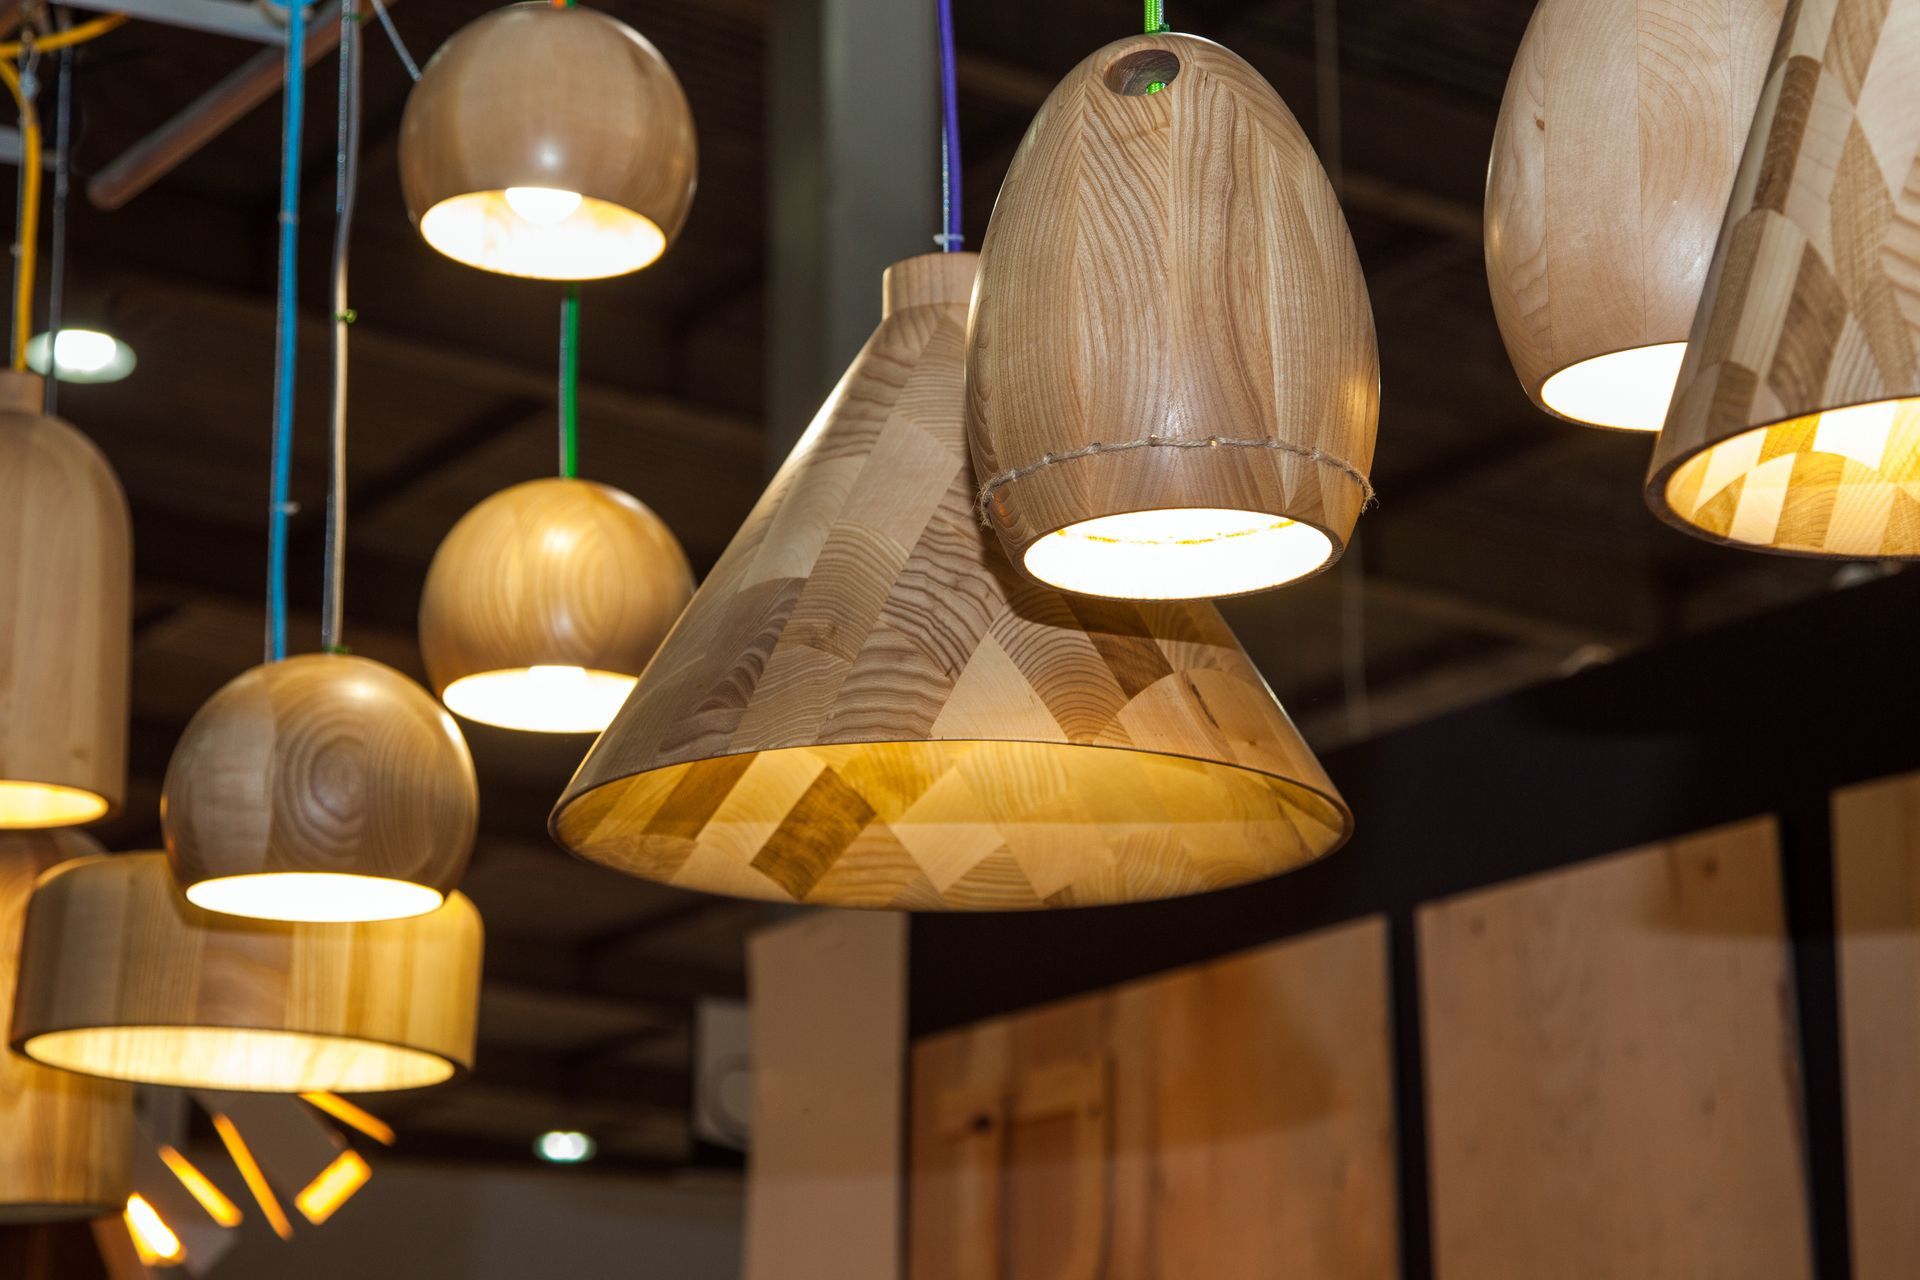 An array of sleek, wooden modern ceiling light fixtures suspended from the ceiling, casting a warm and inviting glow.